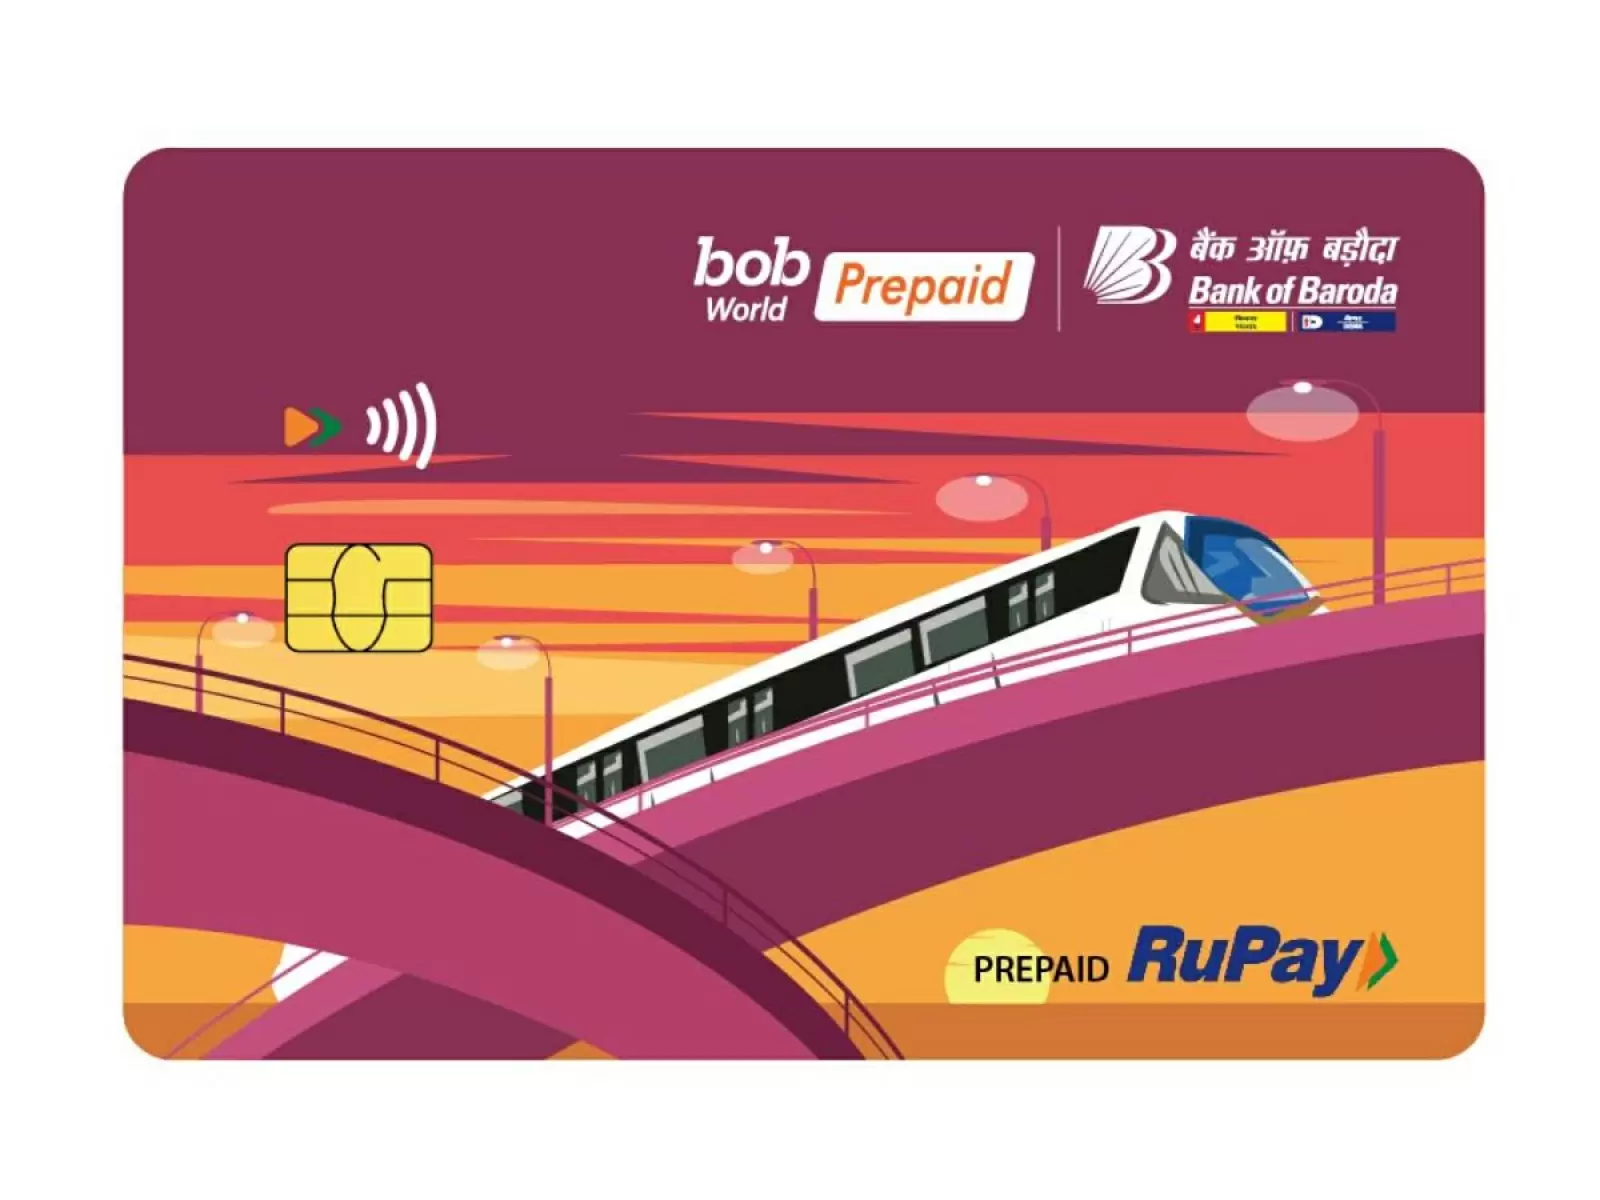 Bank of Baroda Introduces NCMC RuPay Prepaid Card for Effortless and Versatile Transactions